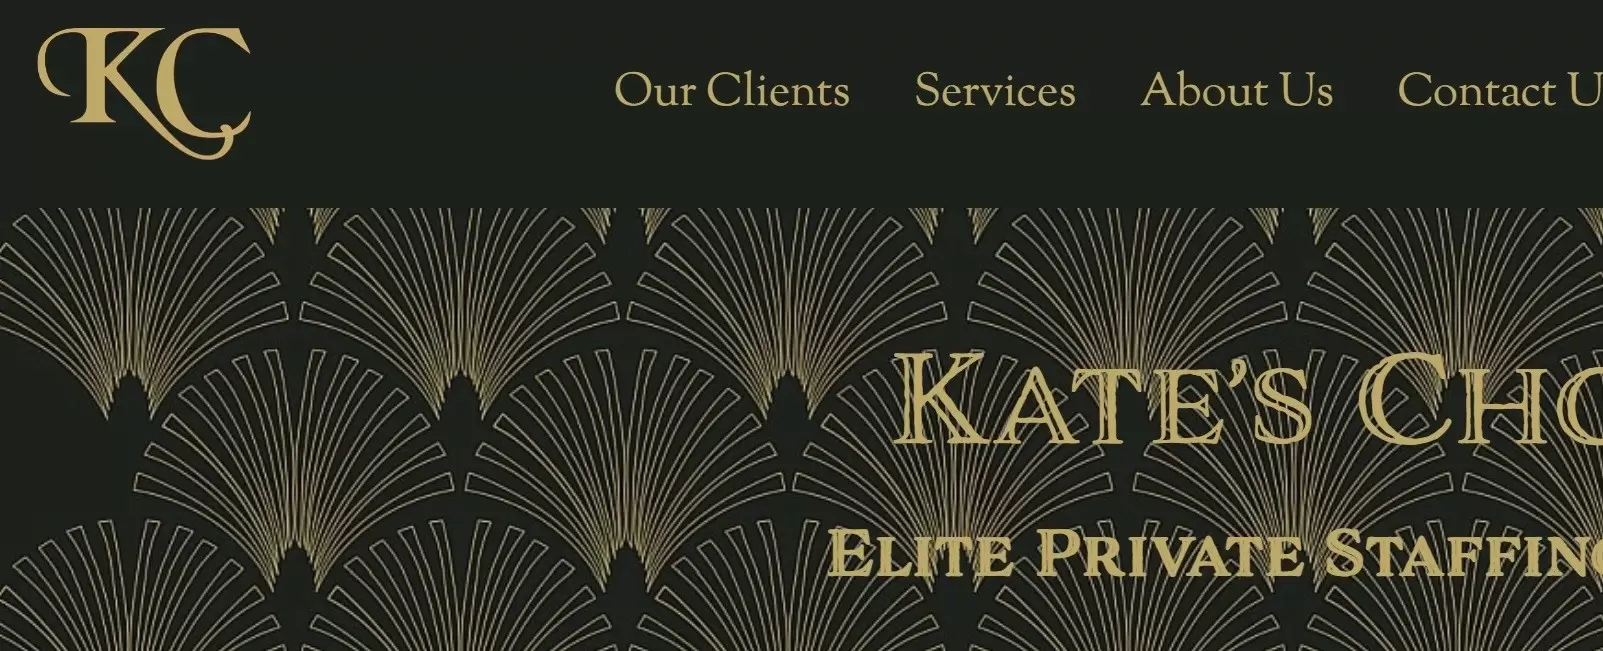 Kate's Choice Elite Private Staffing Agency